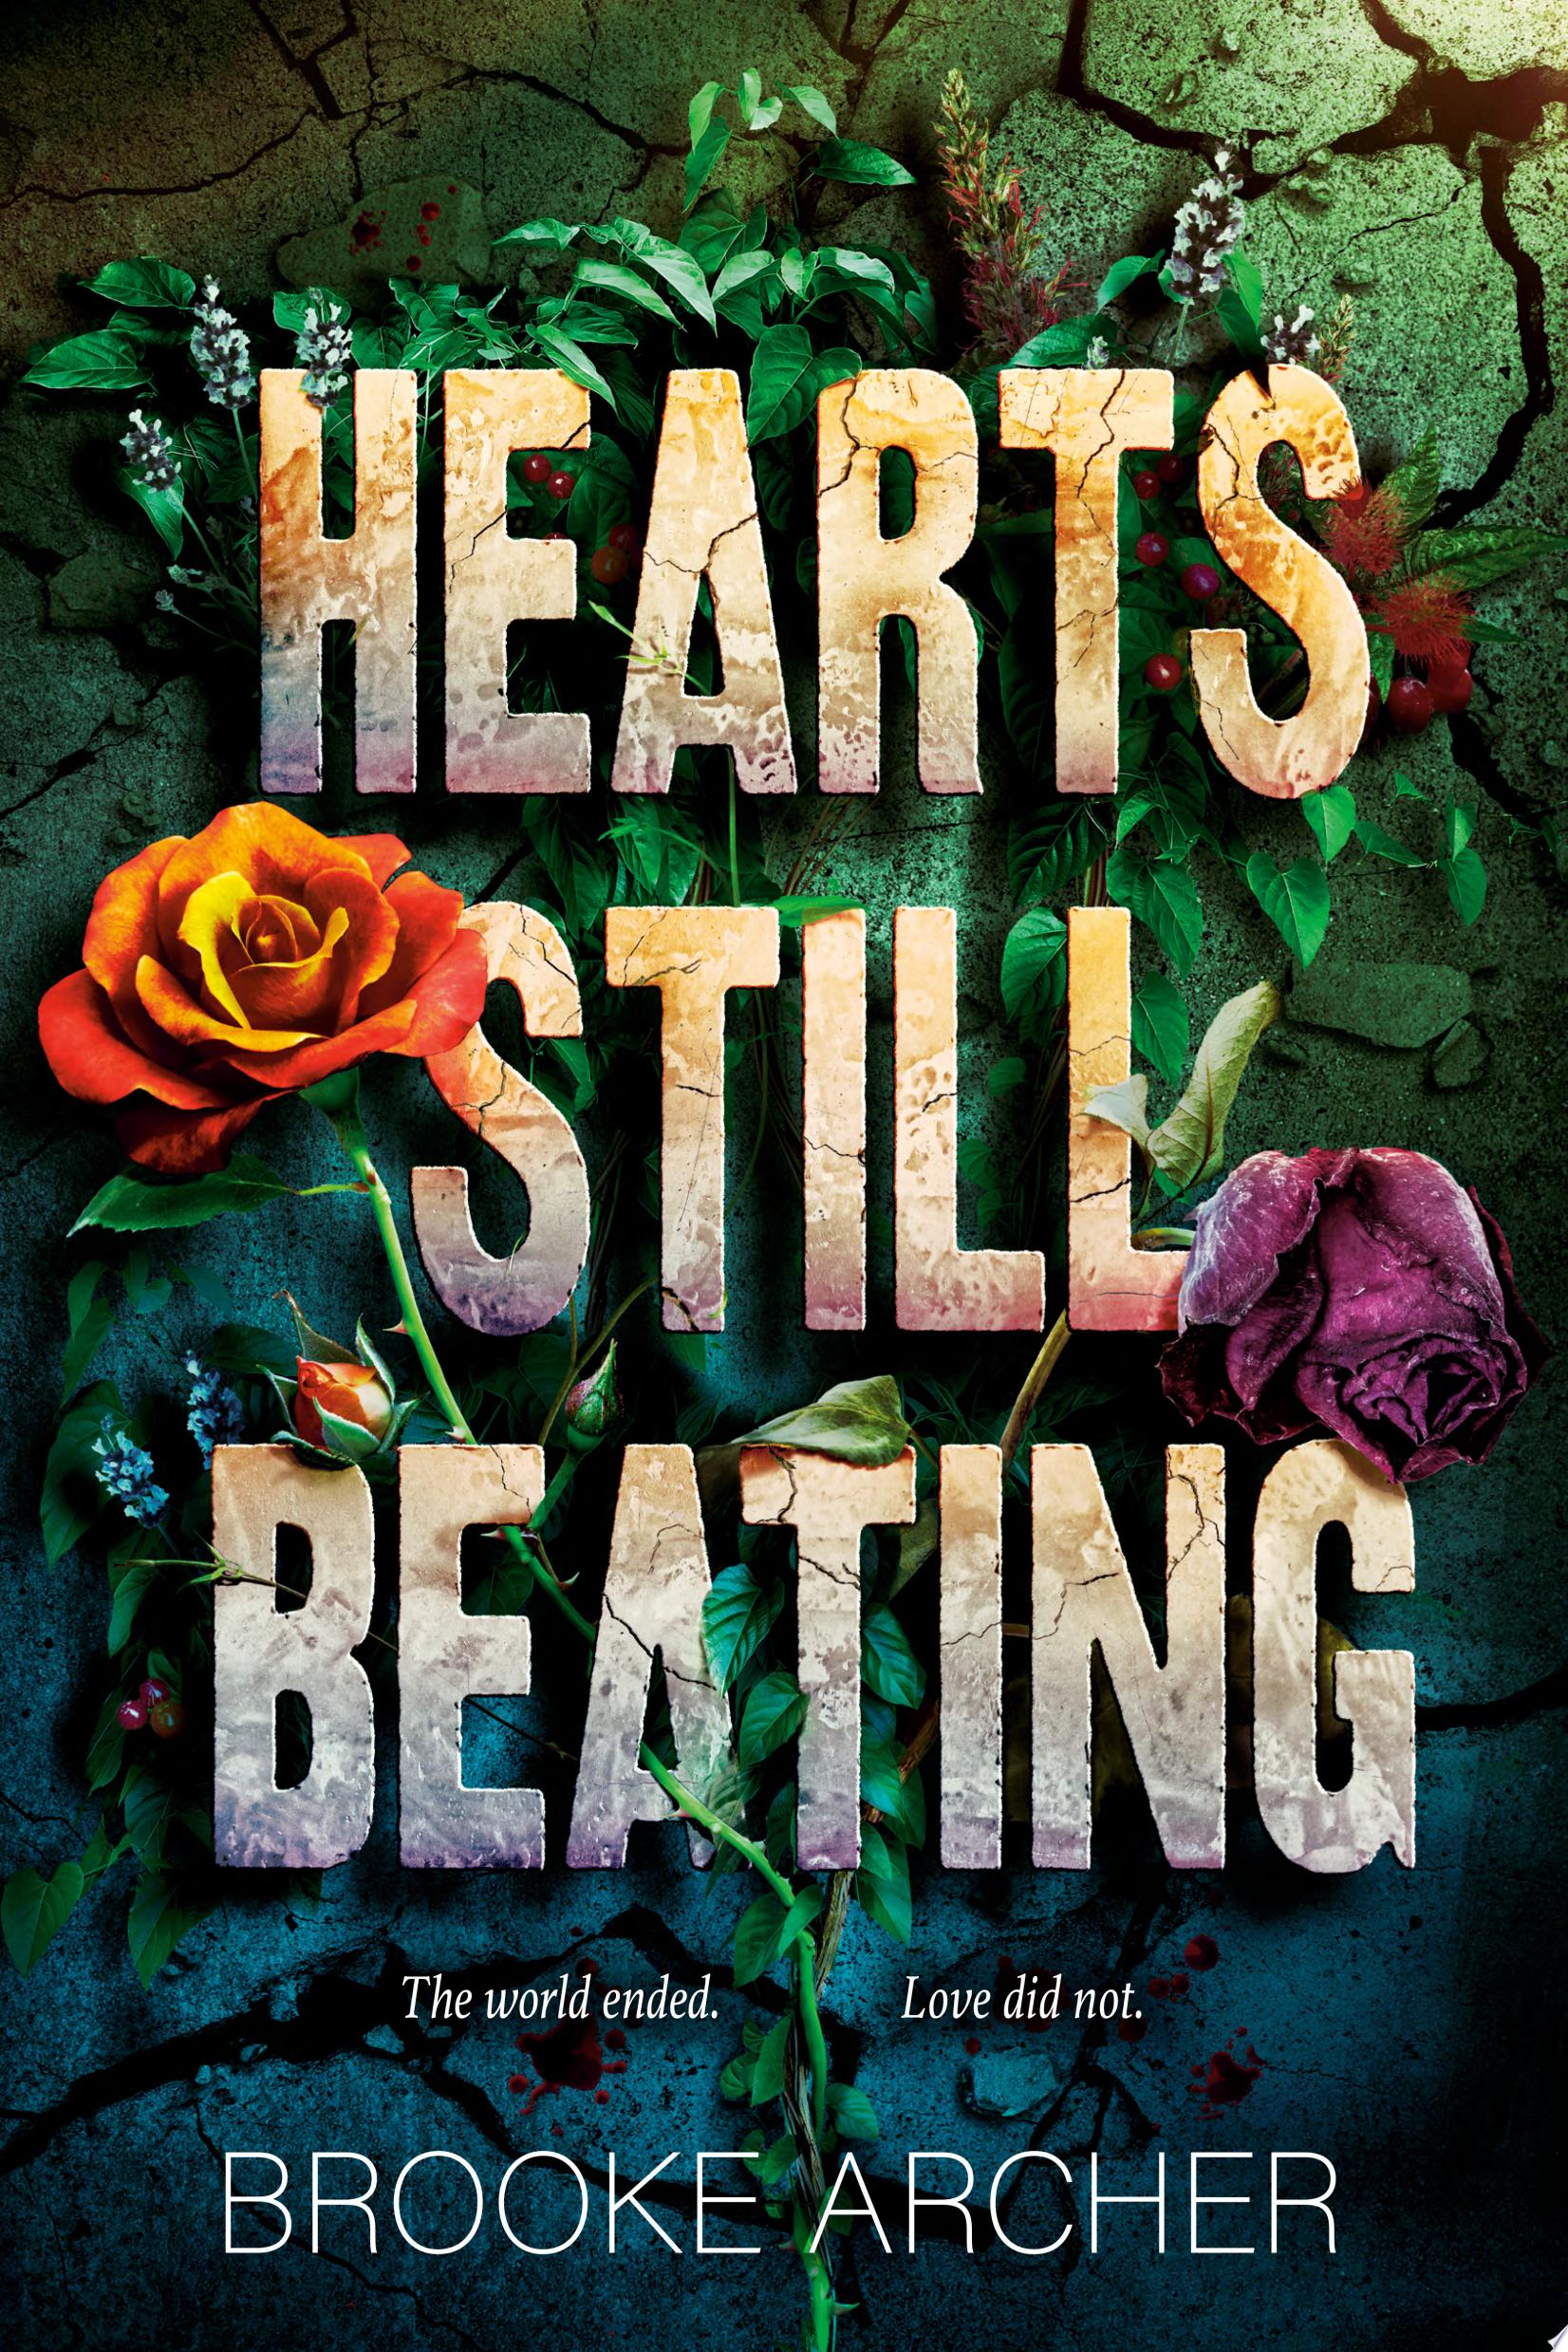 Image for "Hearts Still Beating"